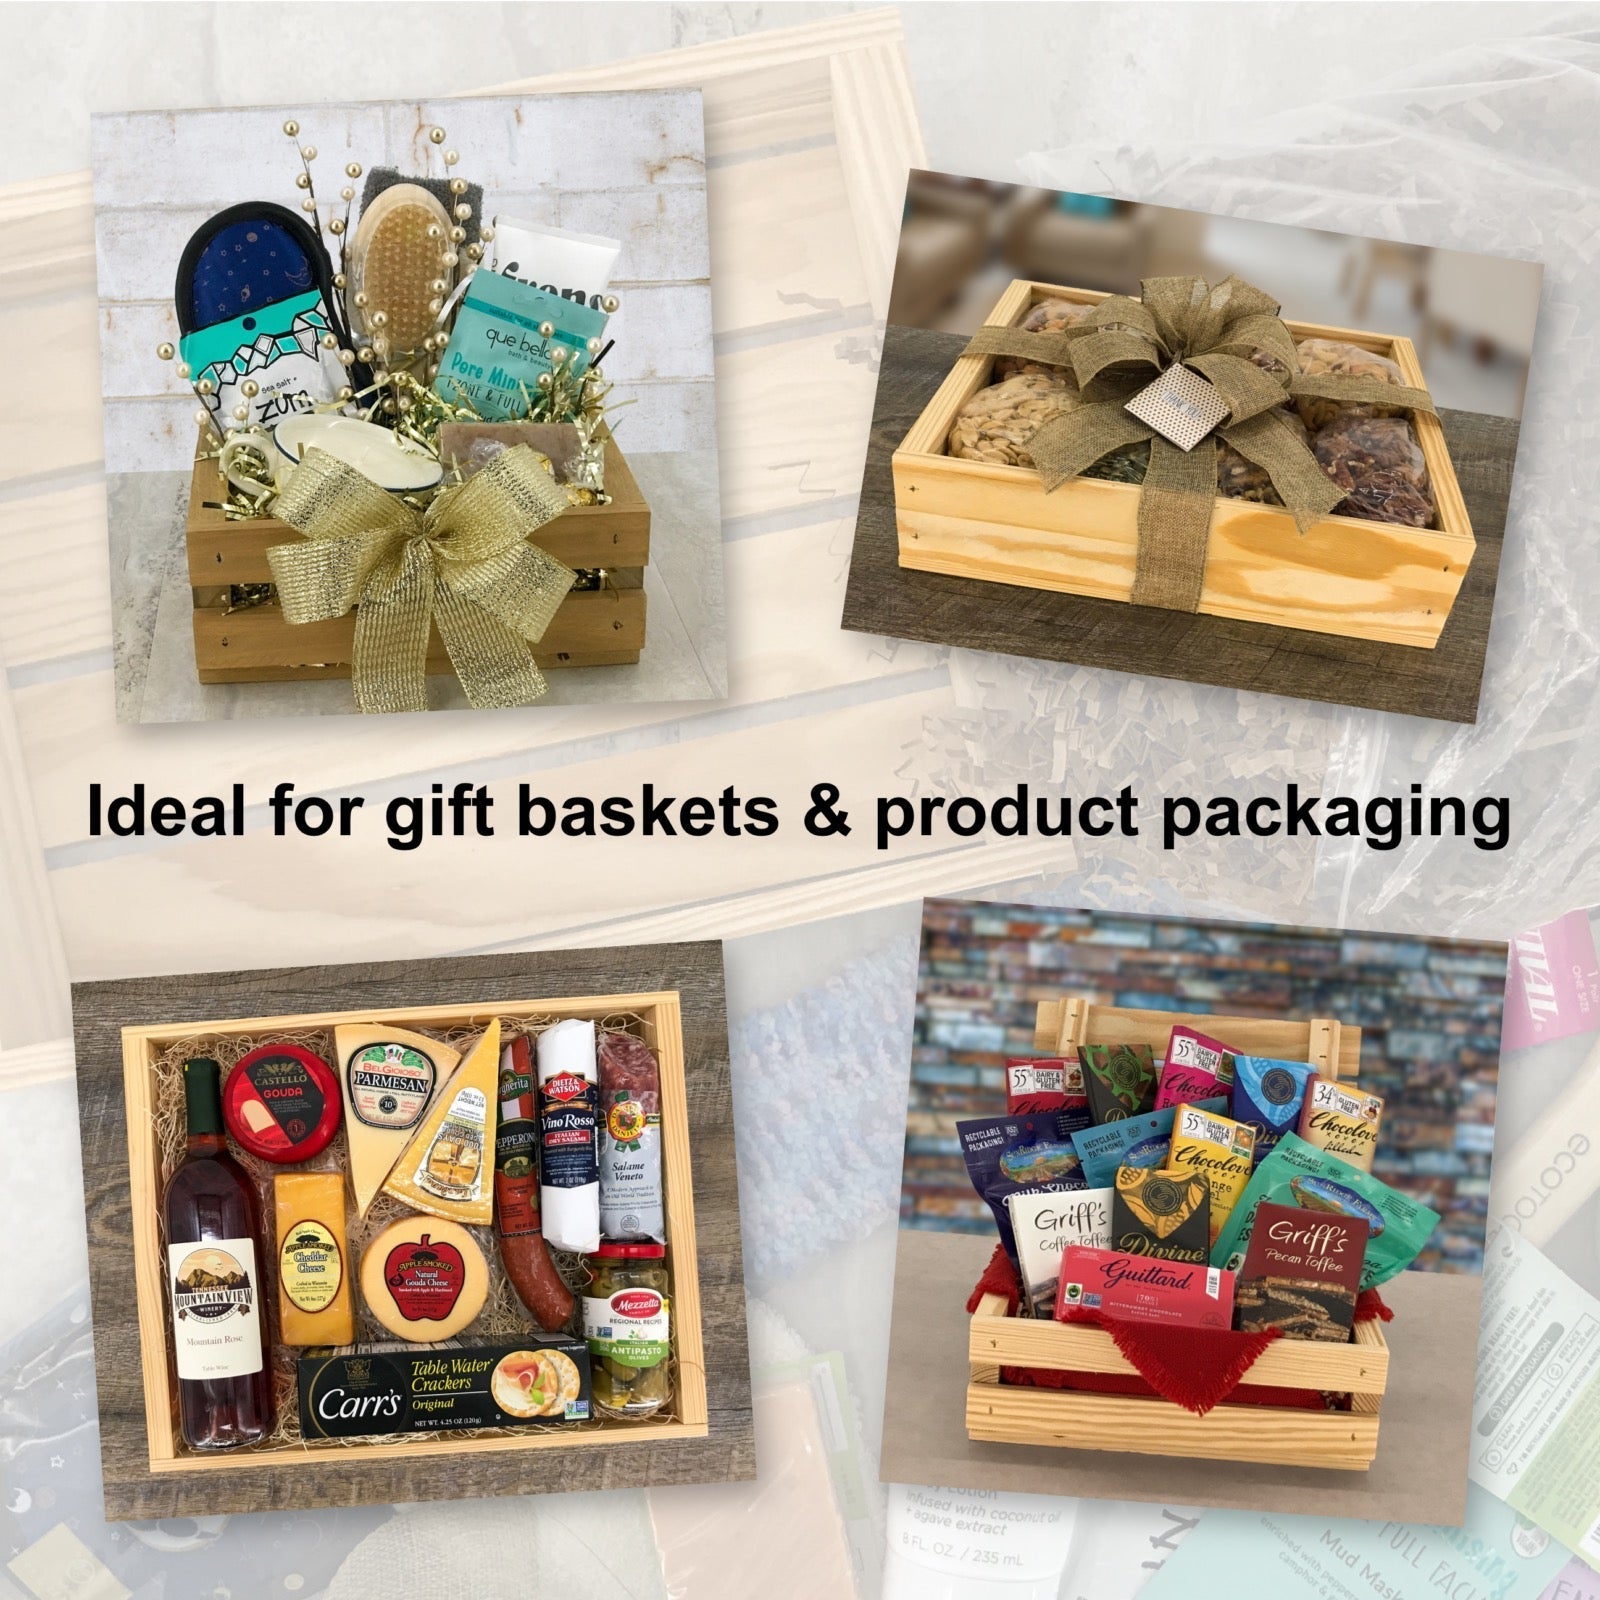 Ideal for gift baskets and product packaging, SS-12-10-4.5-ST-NW-NL, 6-SS-12-10-4.5-ST-NW-NL, 12-SS-12-10-4.5-ST-NW-NL, 24-SS-12-10-4.5-ST-NW-NL, 48-SS-12-10-4.5-ST-NW-NL, 96-SS-12-10-4.5-ST-NW-NL